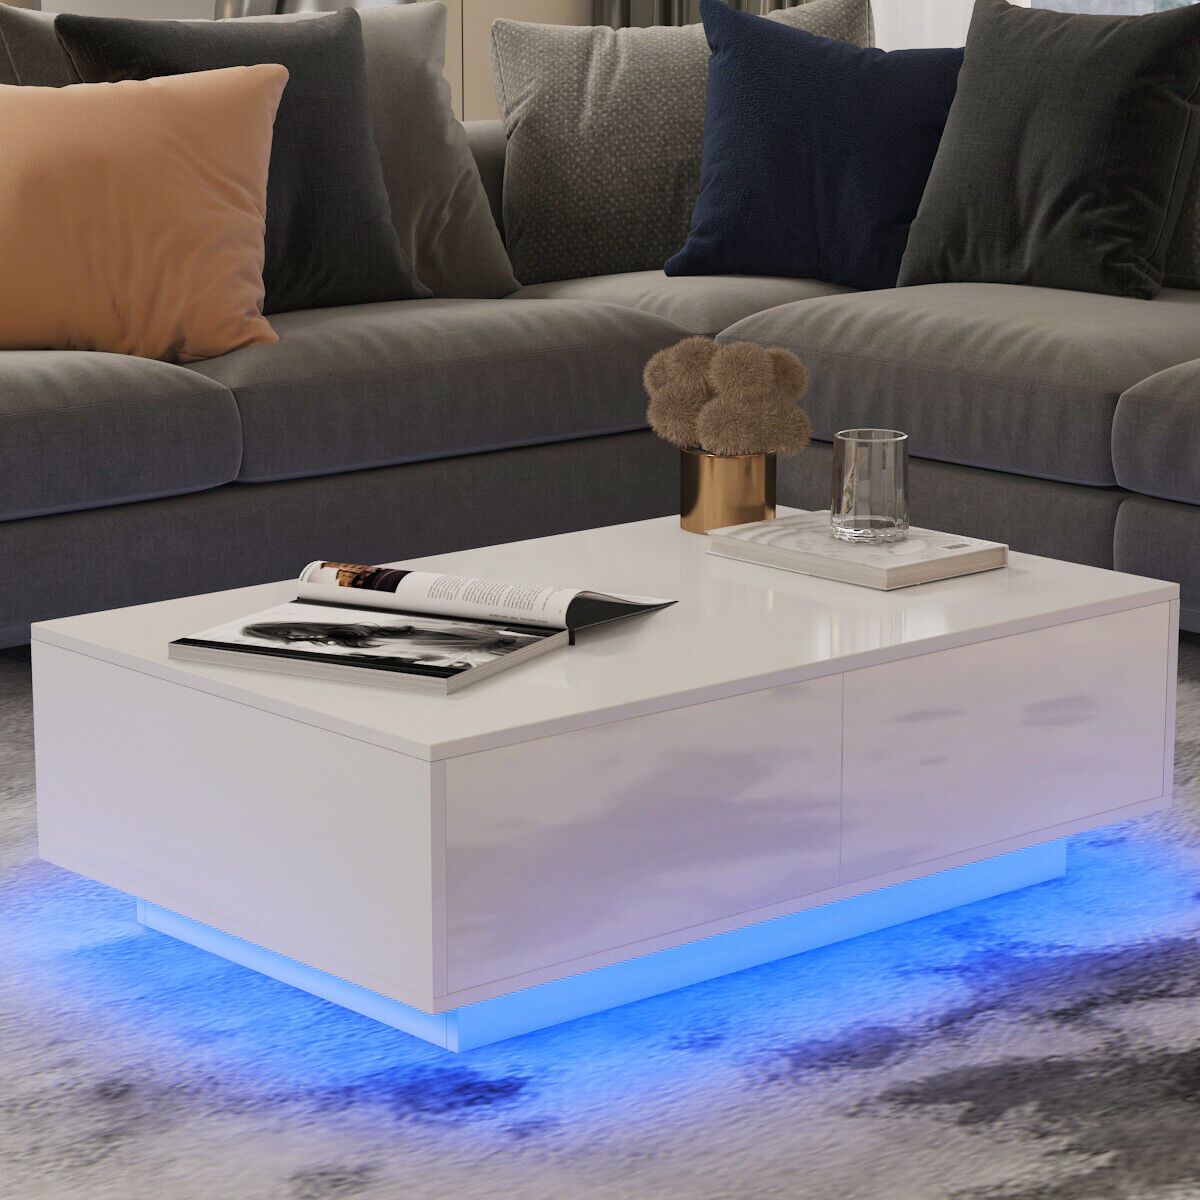 Led Light High Gloss Coffee Table With 4 Drawers Storage Living Room End  Table | Ebay Intended For Led Coffee Tables With 4 Drawers (Photo 9 of 15)